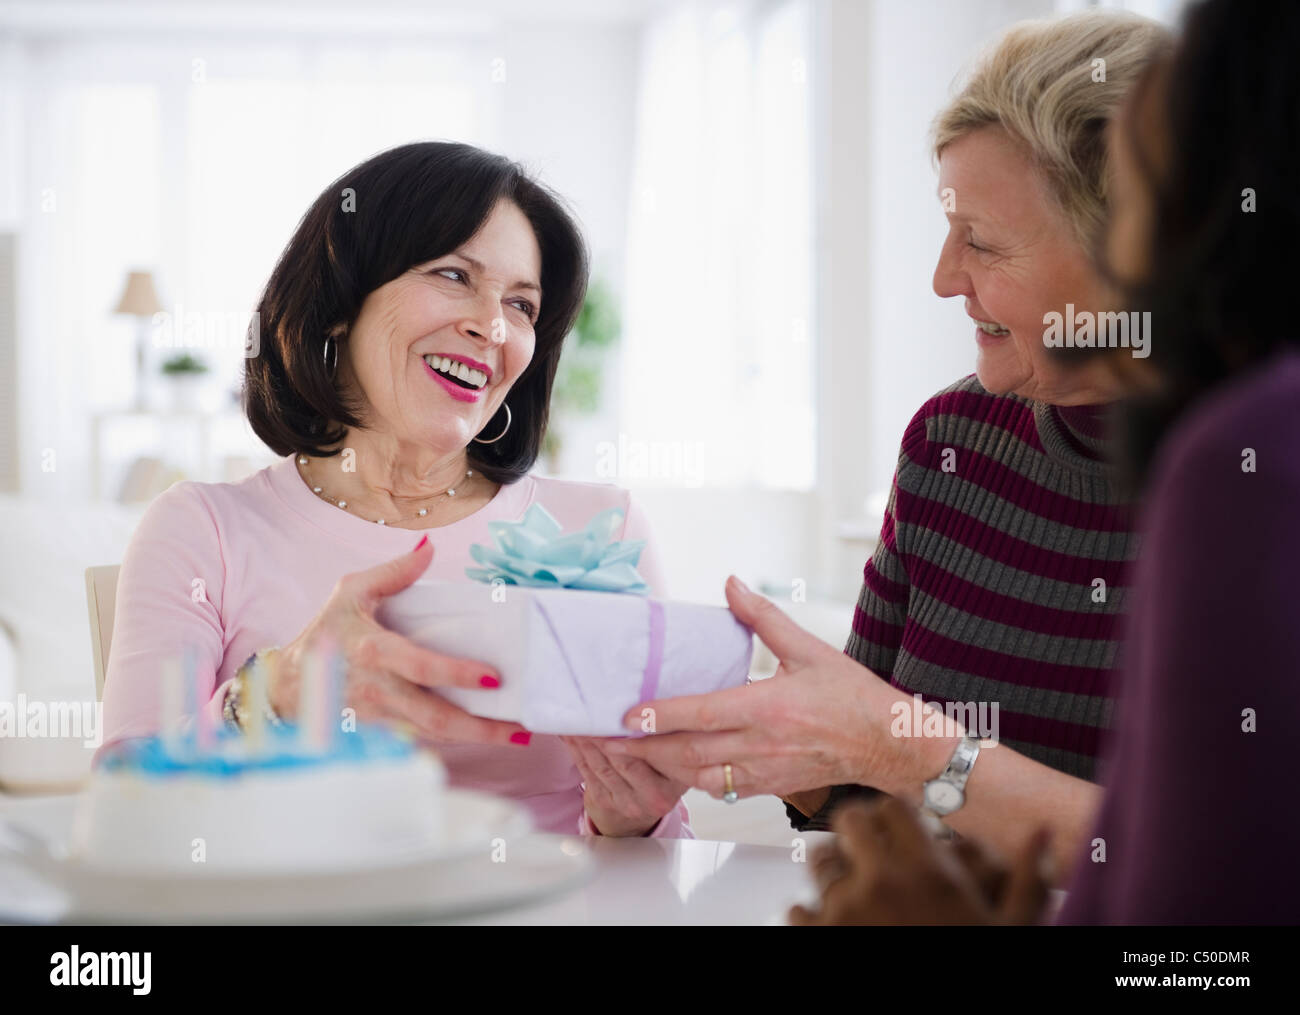 Women surprising friend with birthday cake and gift Stock Photo